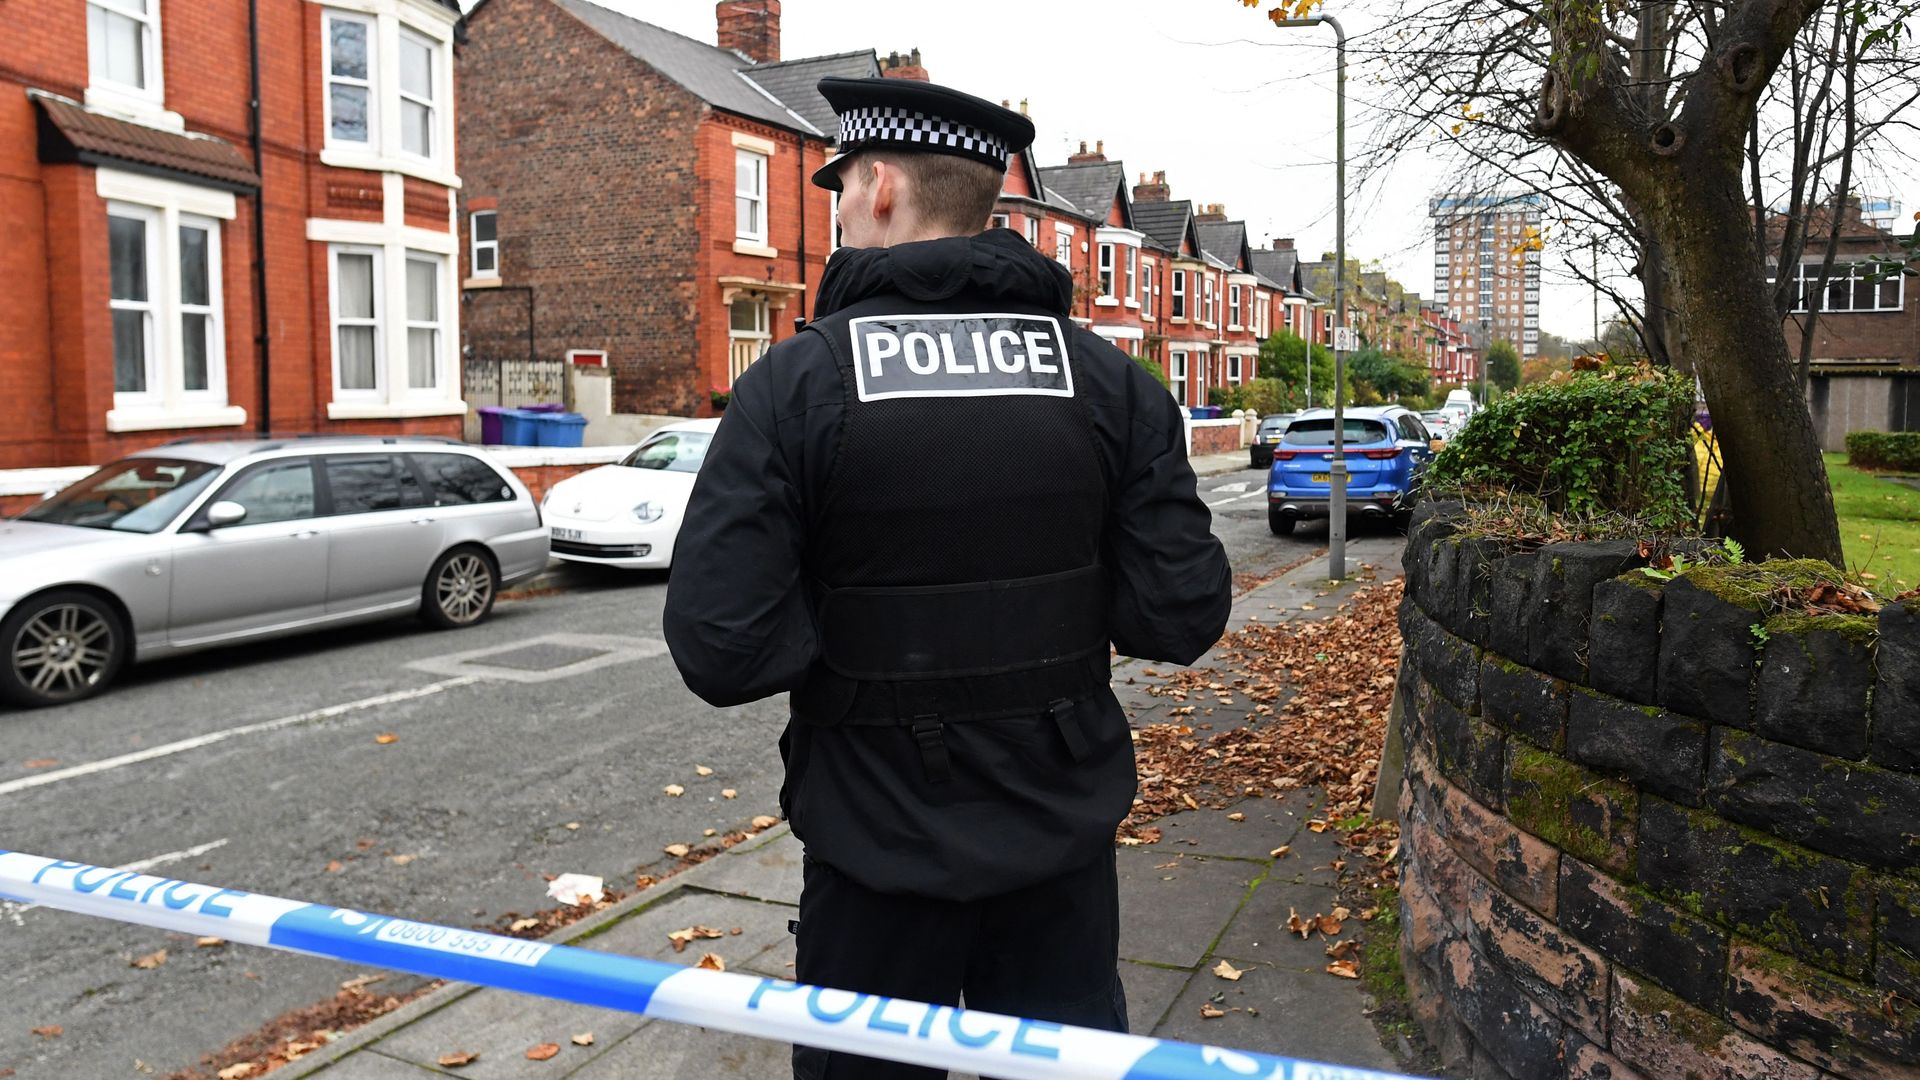 A police officer standing guard near the bomb site in Liverpool on Nov. 15.